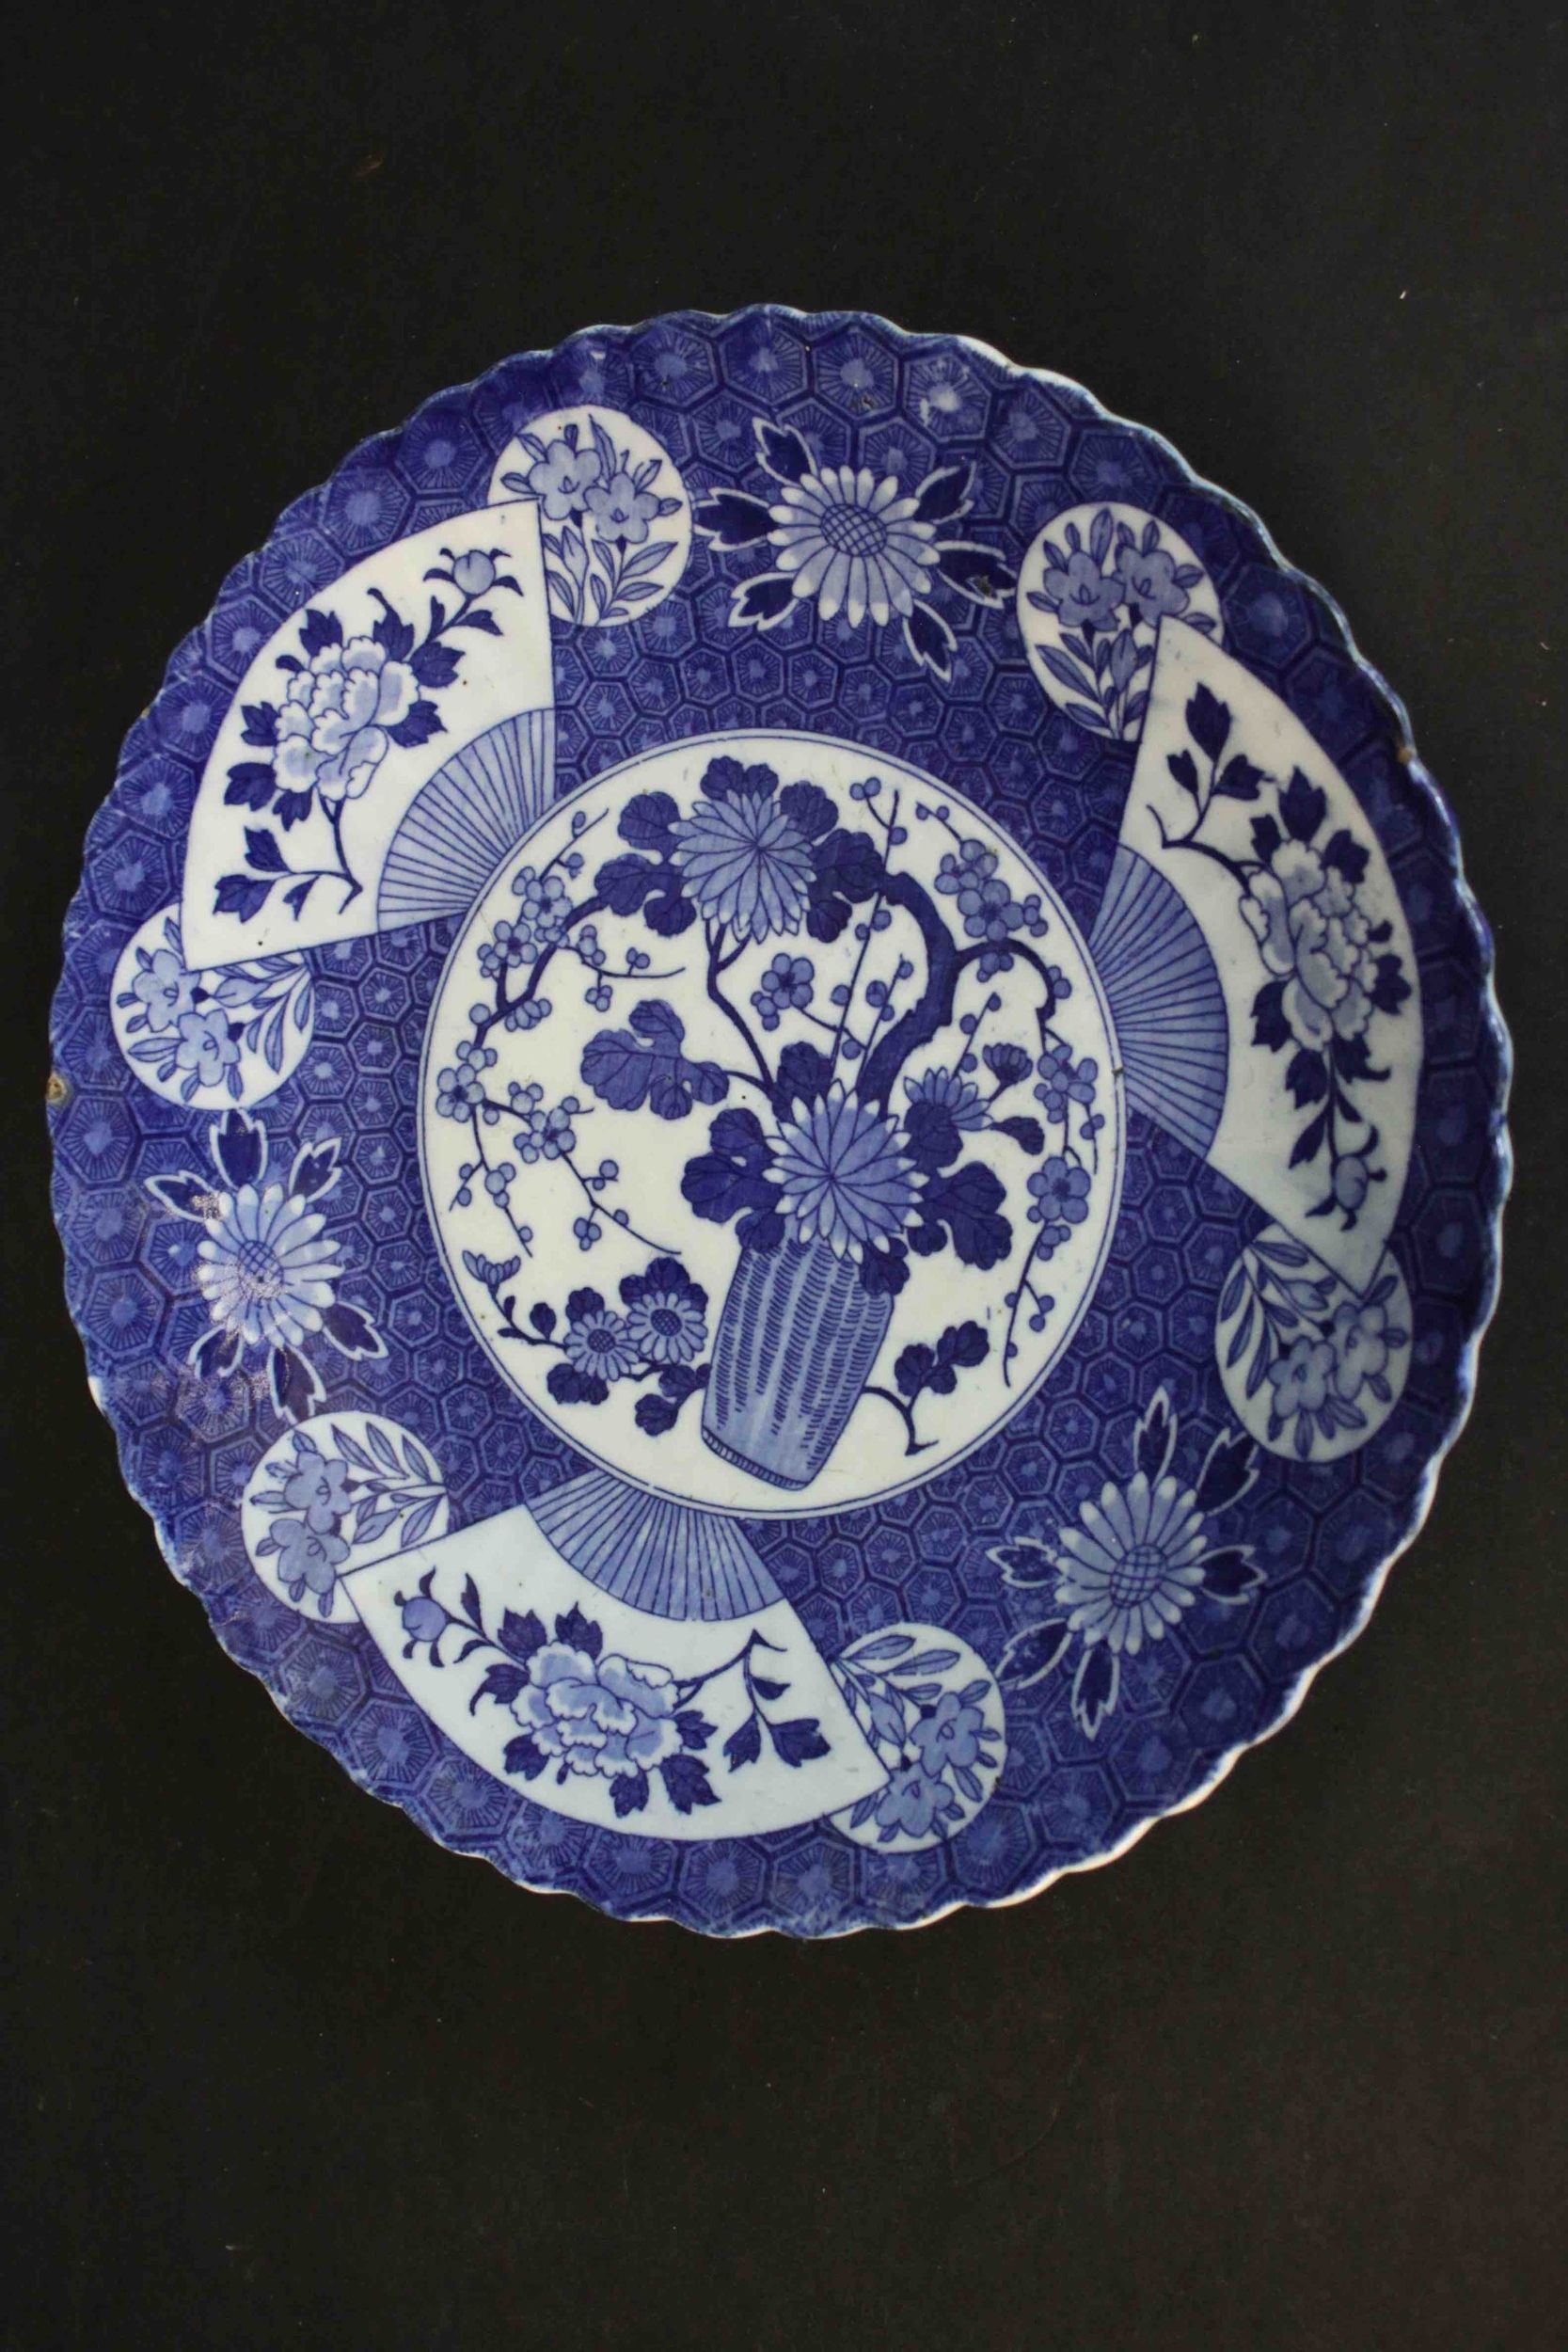 A large 19th century Japanese blue and white scalloped edge ceramic charger with transfer design